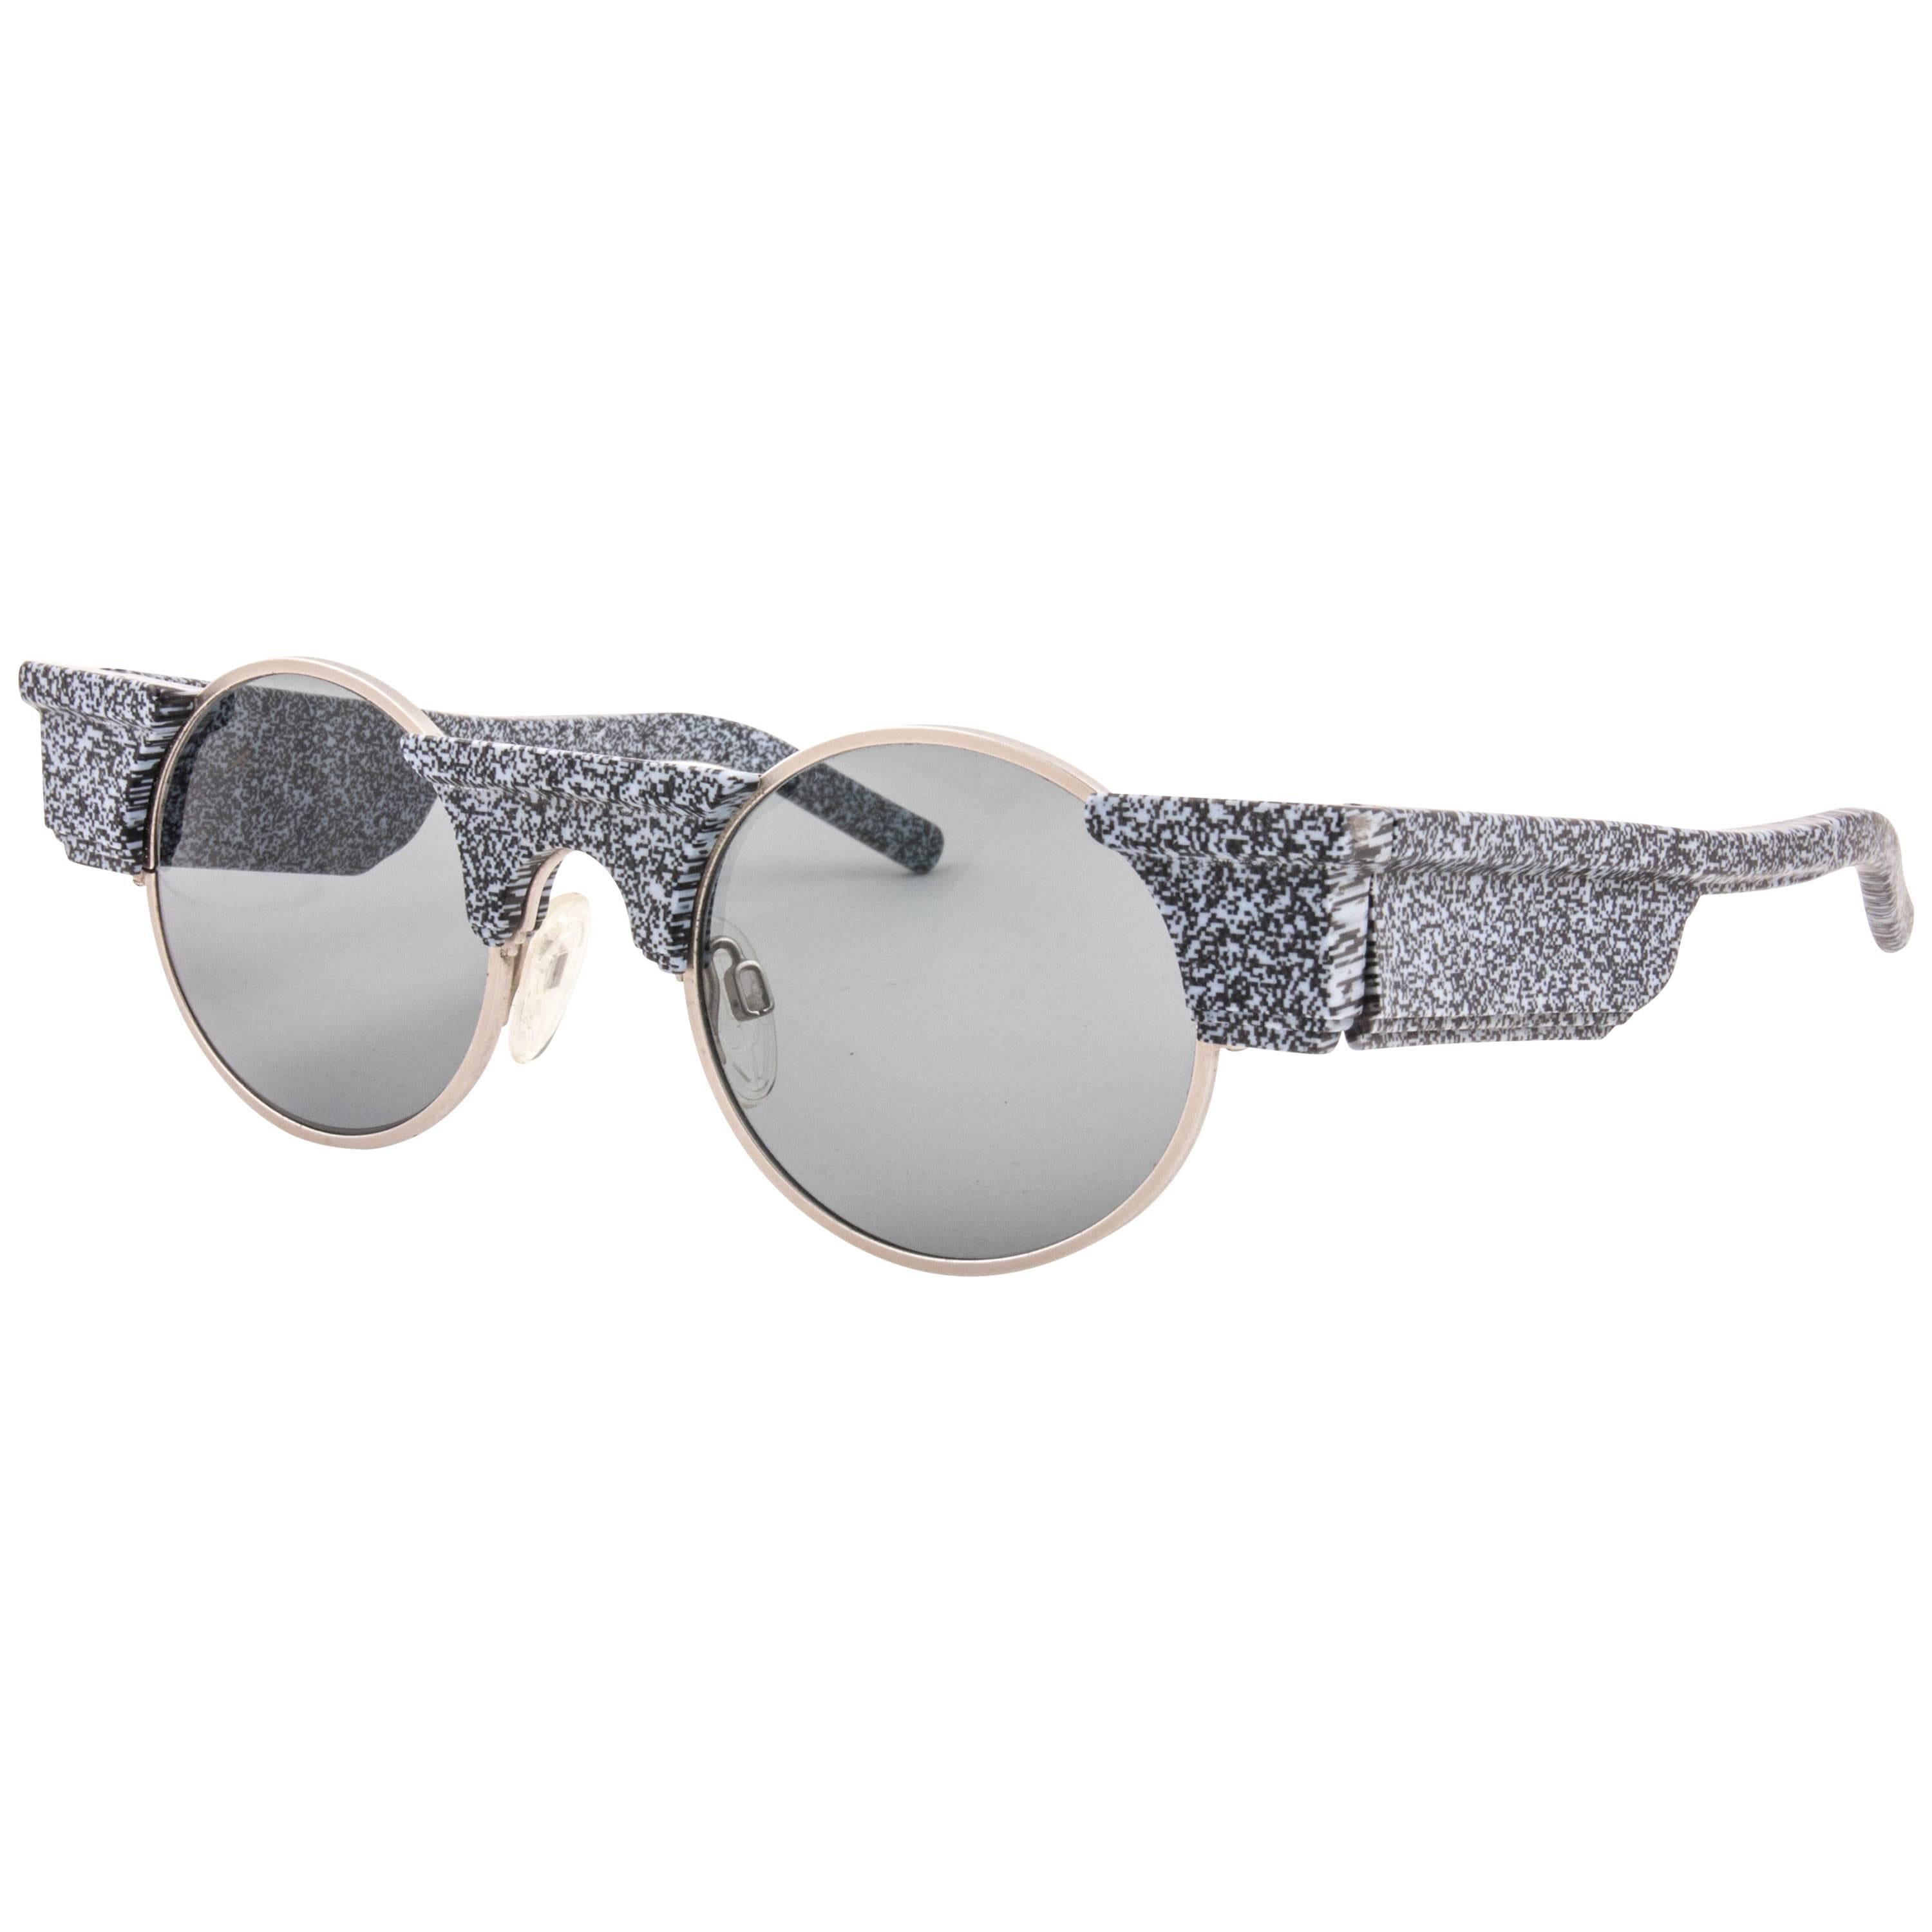 Striking pair of vintage Karl Lagerfeld Round 0599 grey marbled sunglasses sporting a spotless pair of grey lenses. 
Superb design emulating ancient greek architecture. 
New, never used or displayed, this pair of vintage Karl Lagerfeld is a rare